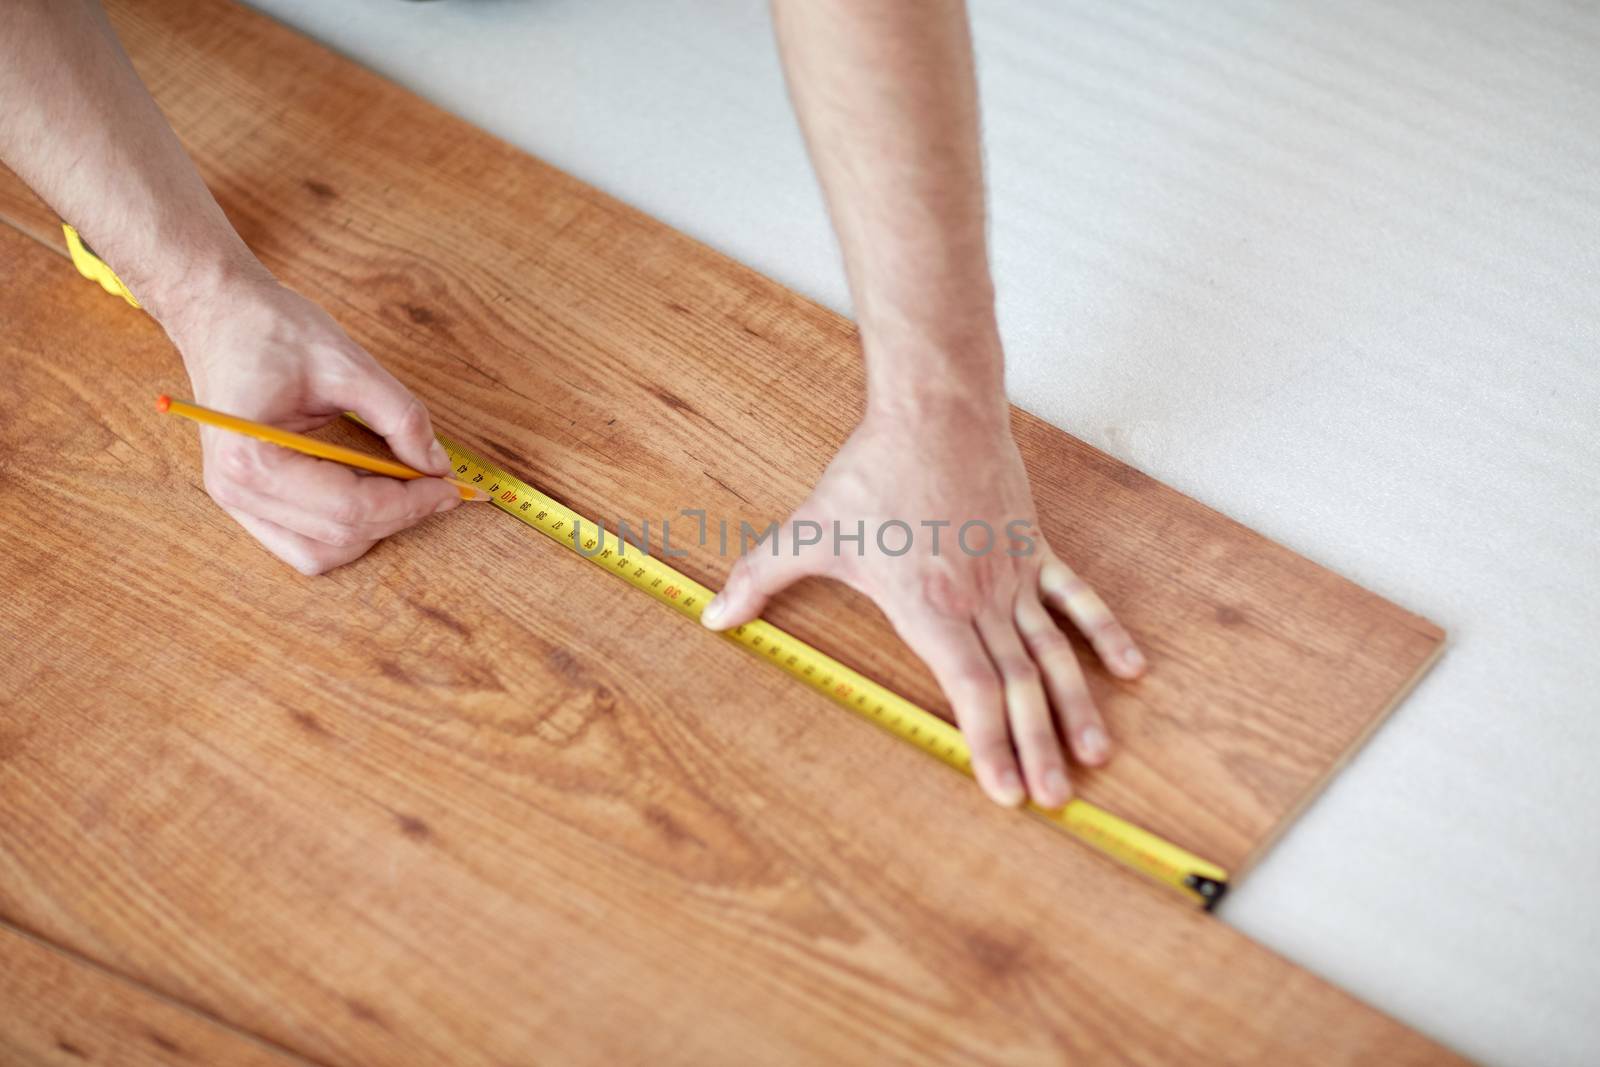 repair, building, floor and people concept - close up of male hands measuring wooden flooring with ruler and making mark by pencil